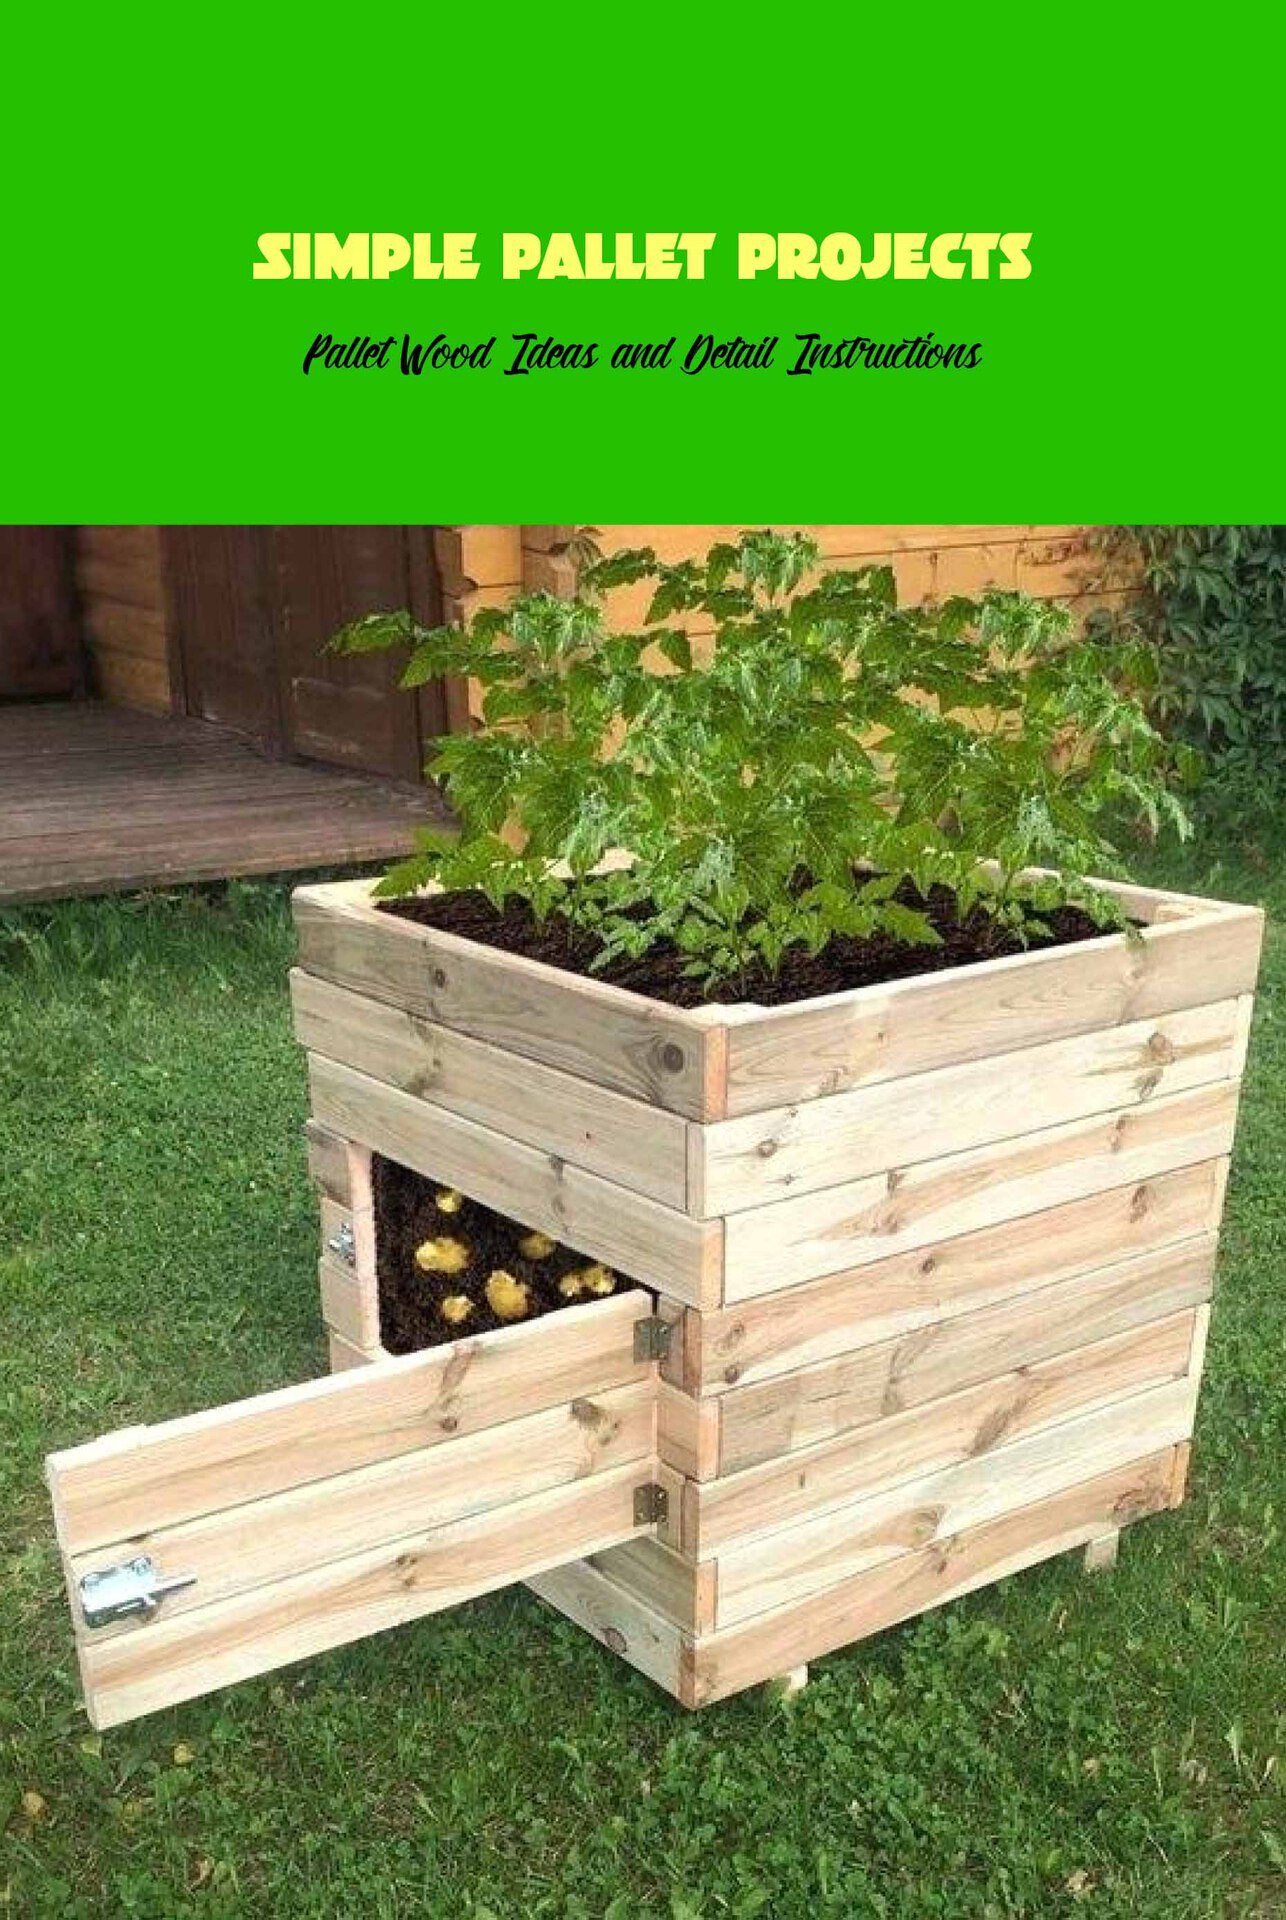 Download Simple Pallet Projects: Pallet Wood Ideas and Detail